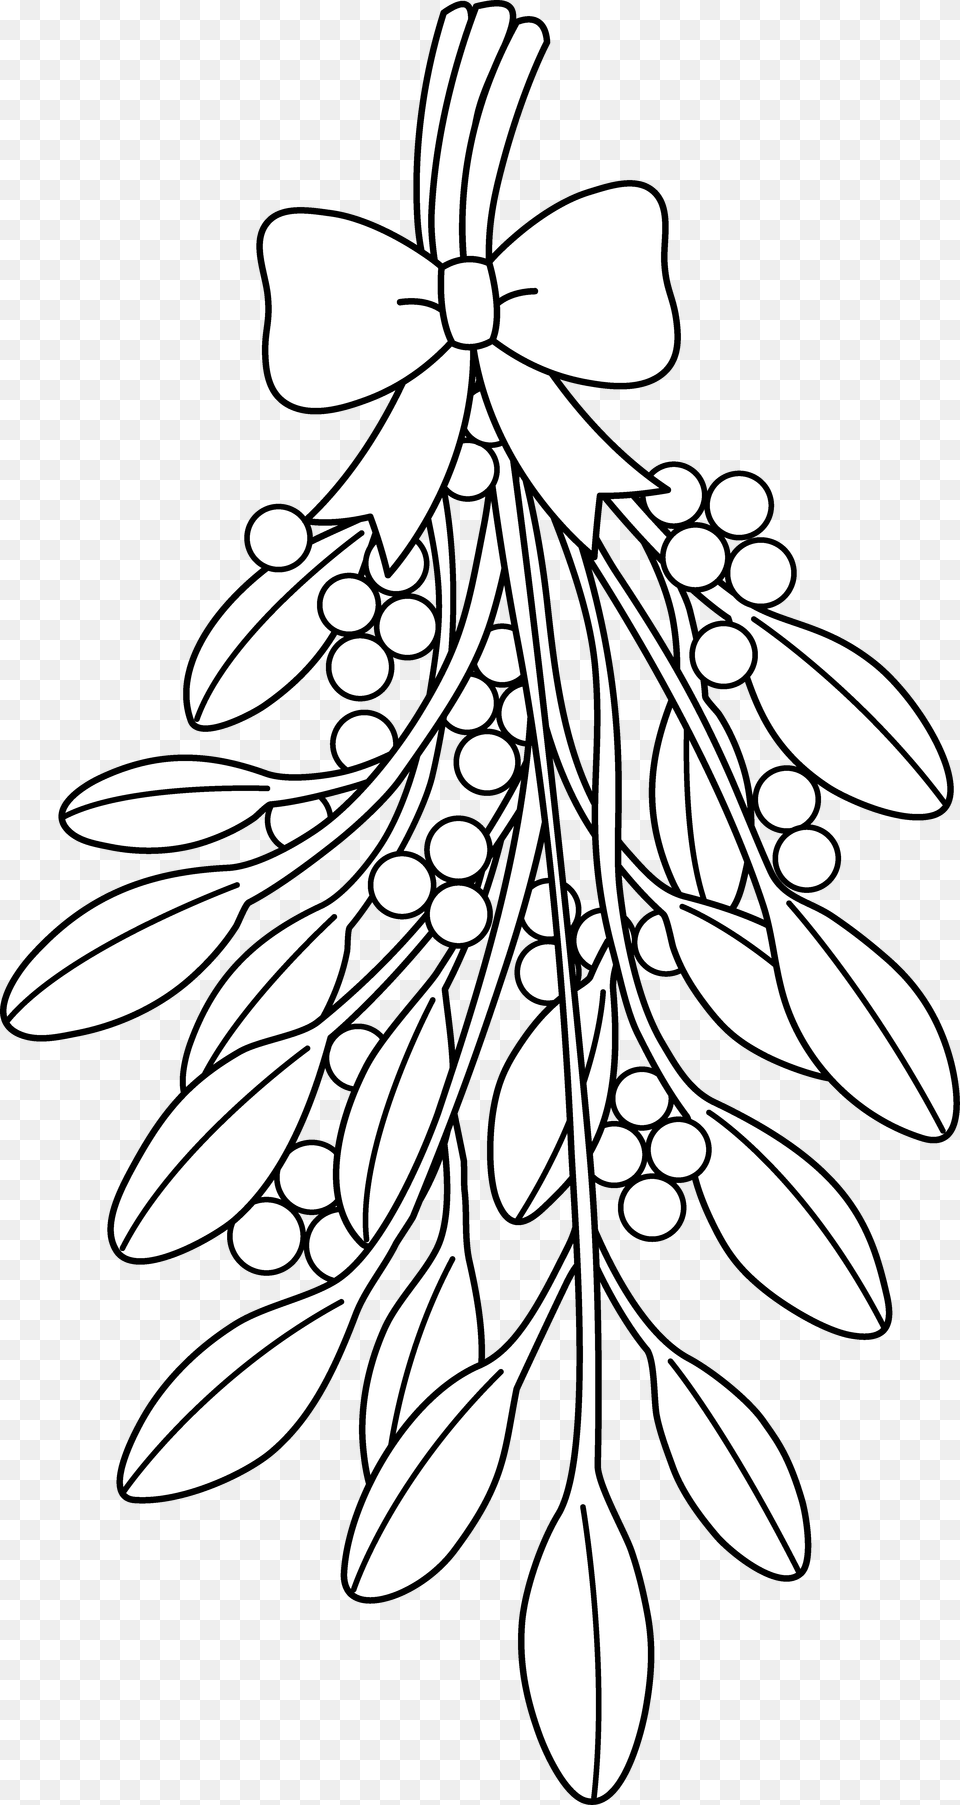 Mistletoe Coloring Pages, Art, Drawing, Floral Design, Graphics Png Image